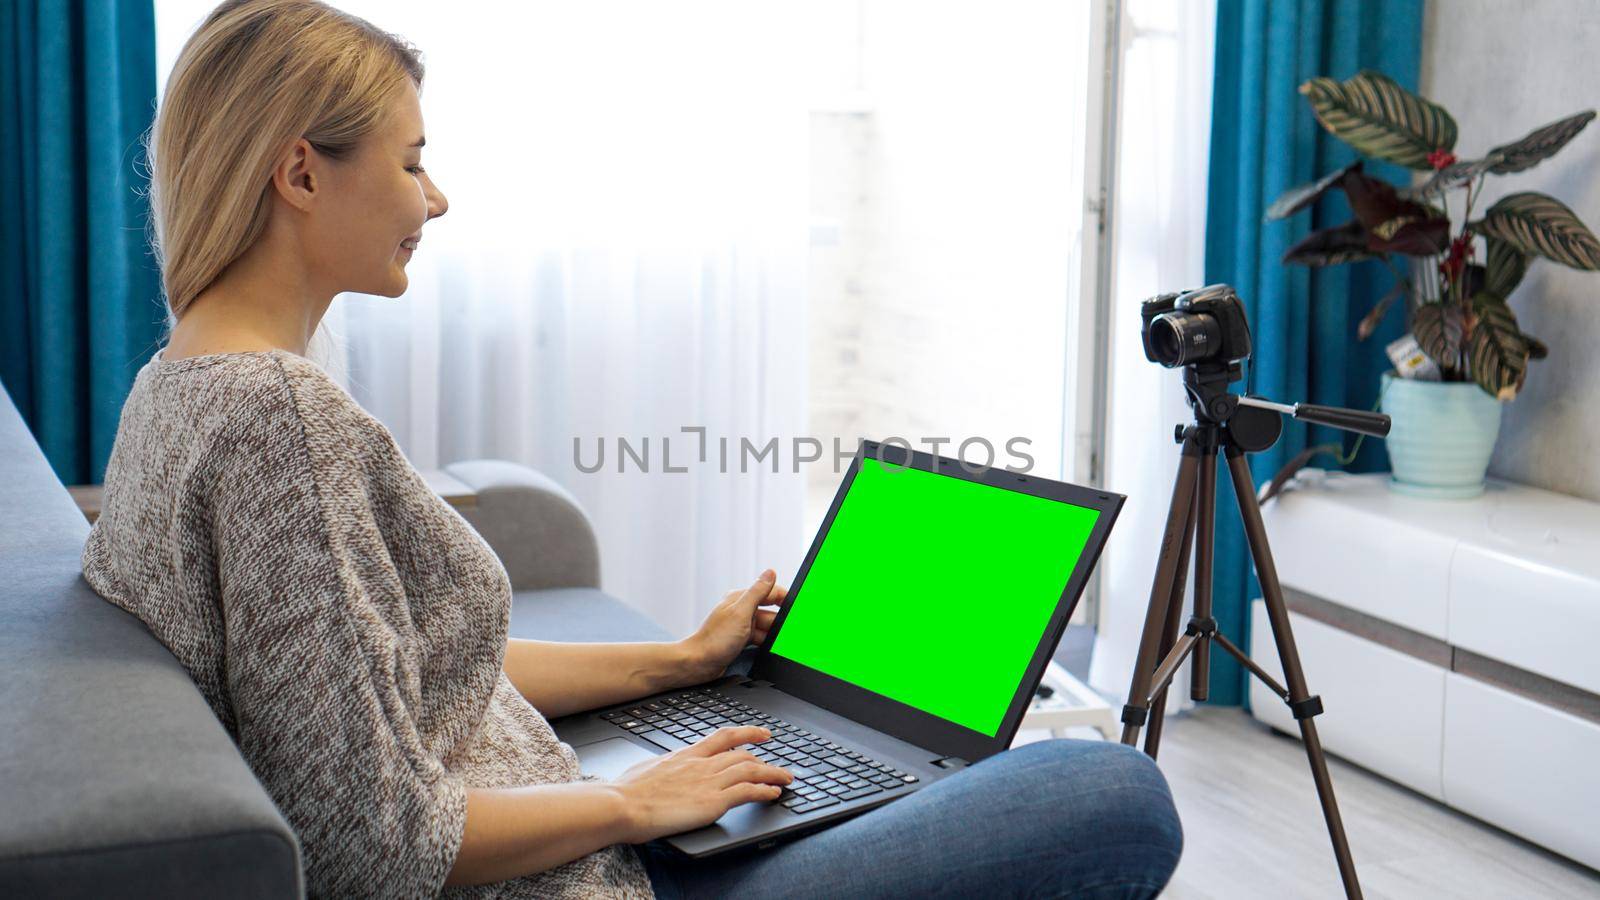 Woman blogger working on laptop. View of camera on tripod and laptop with green screen chromakey